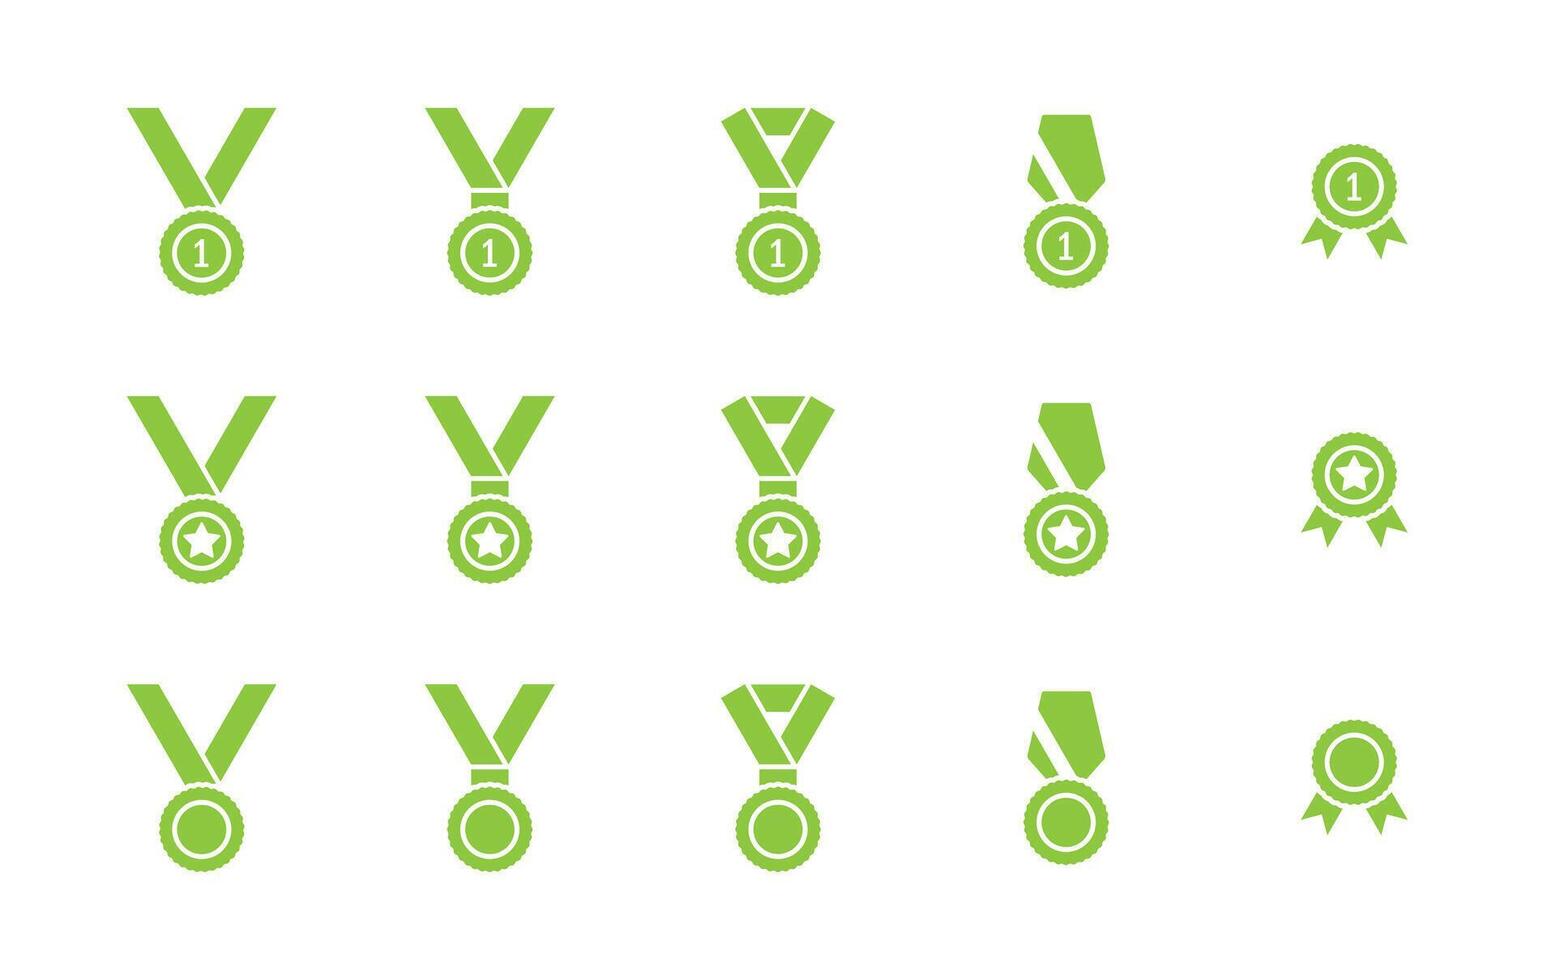 Medal icon set. Green color pictograms isolated on a white background. Honor, Awards and Achievements signs. Winner emblem symbo. Vector illustration.